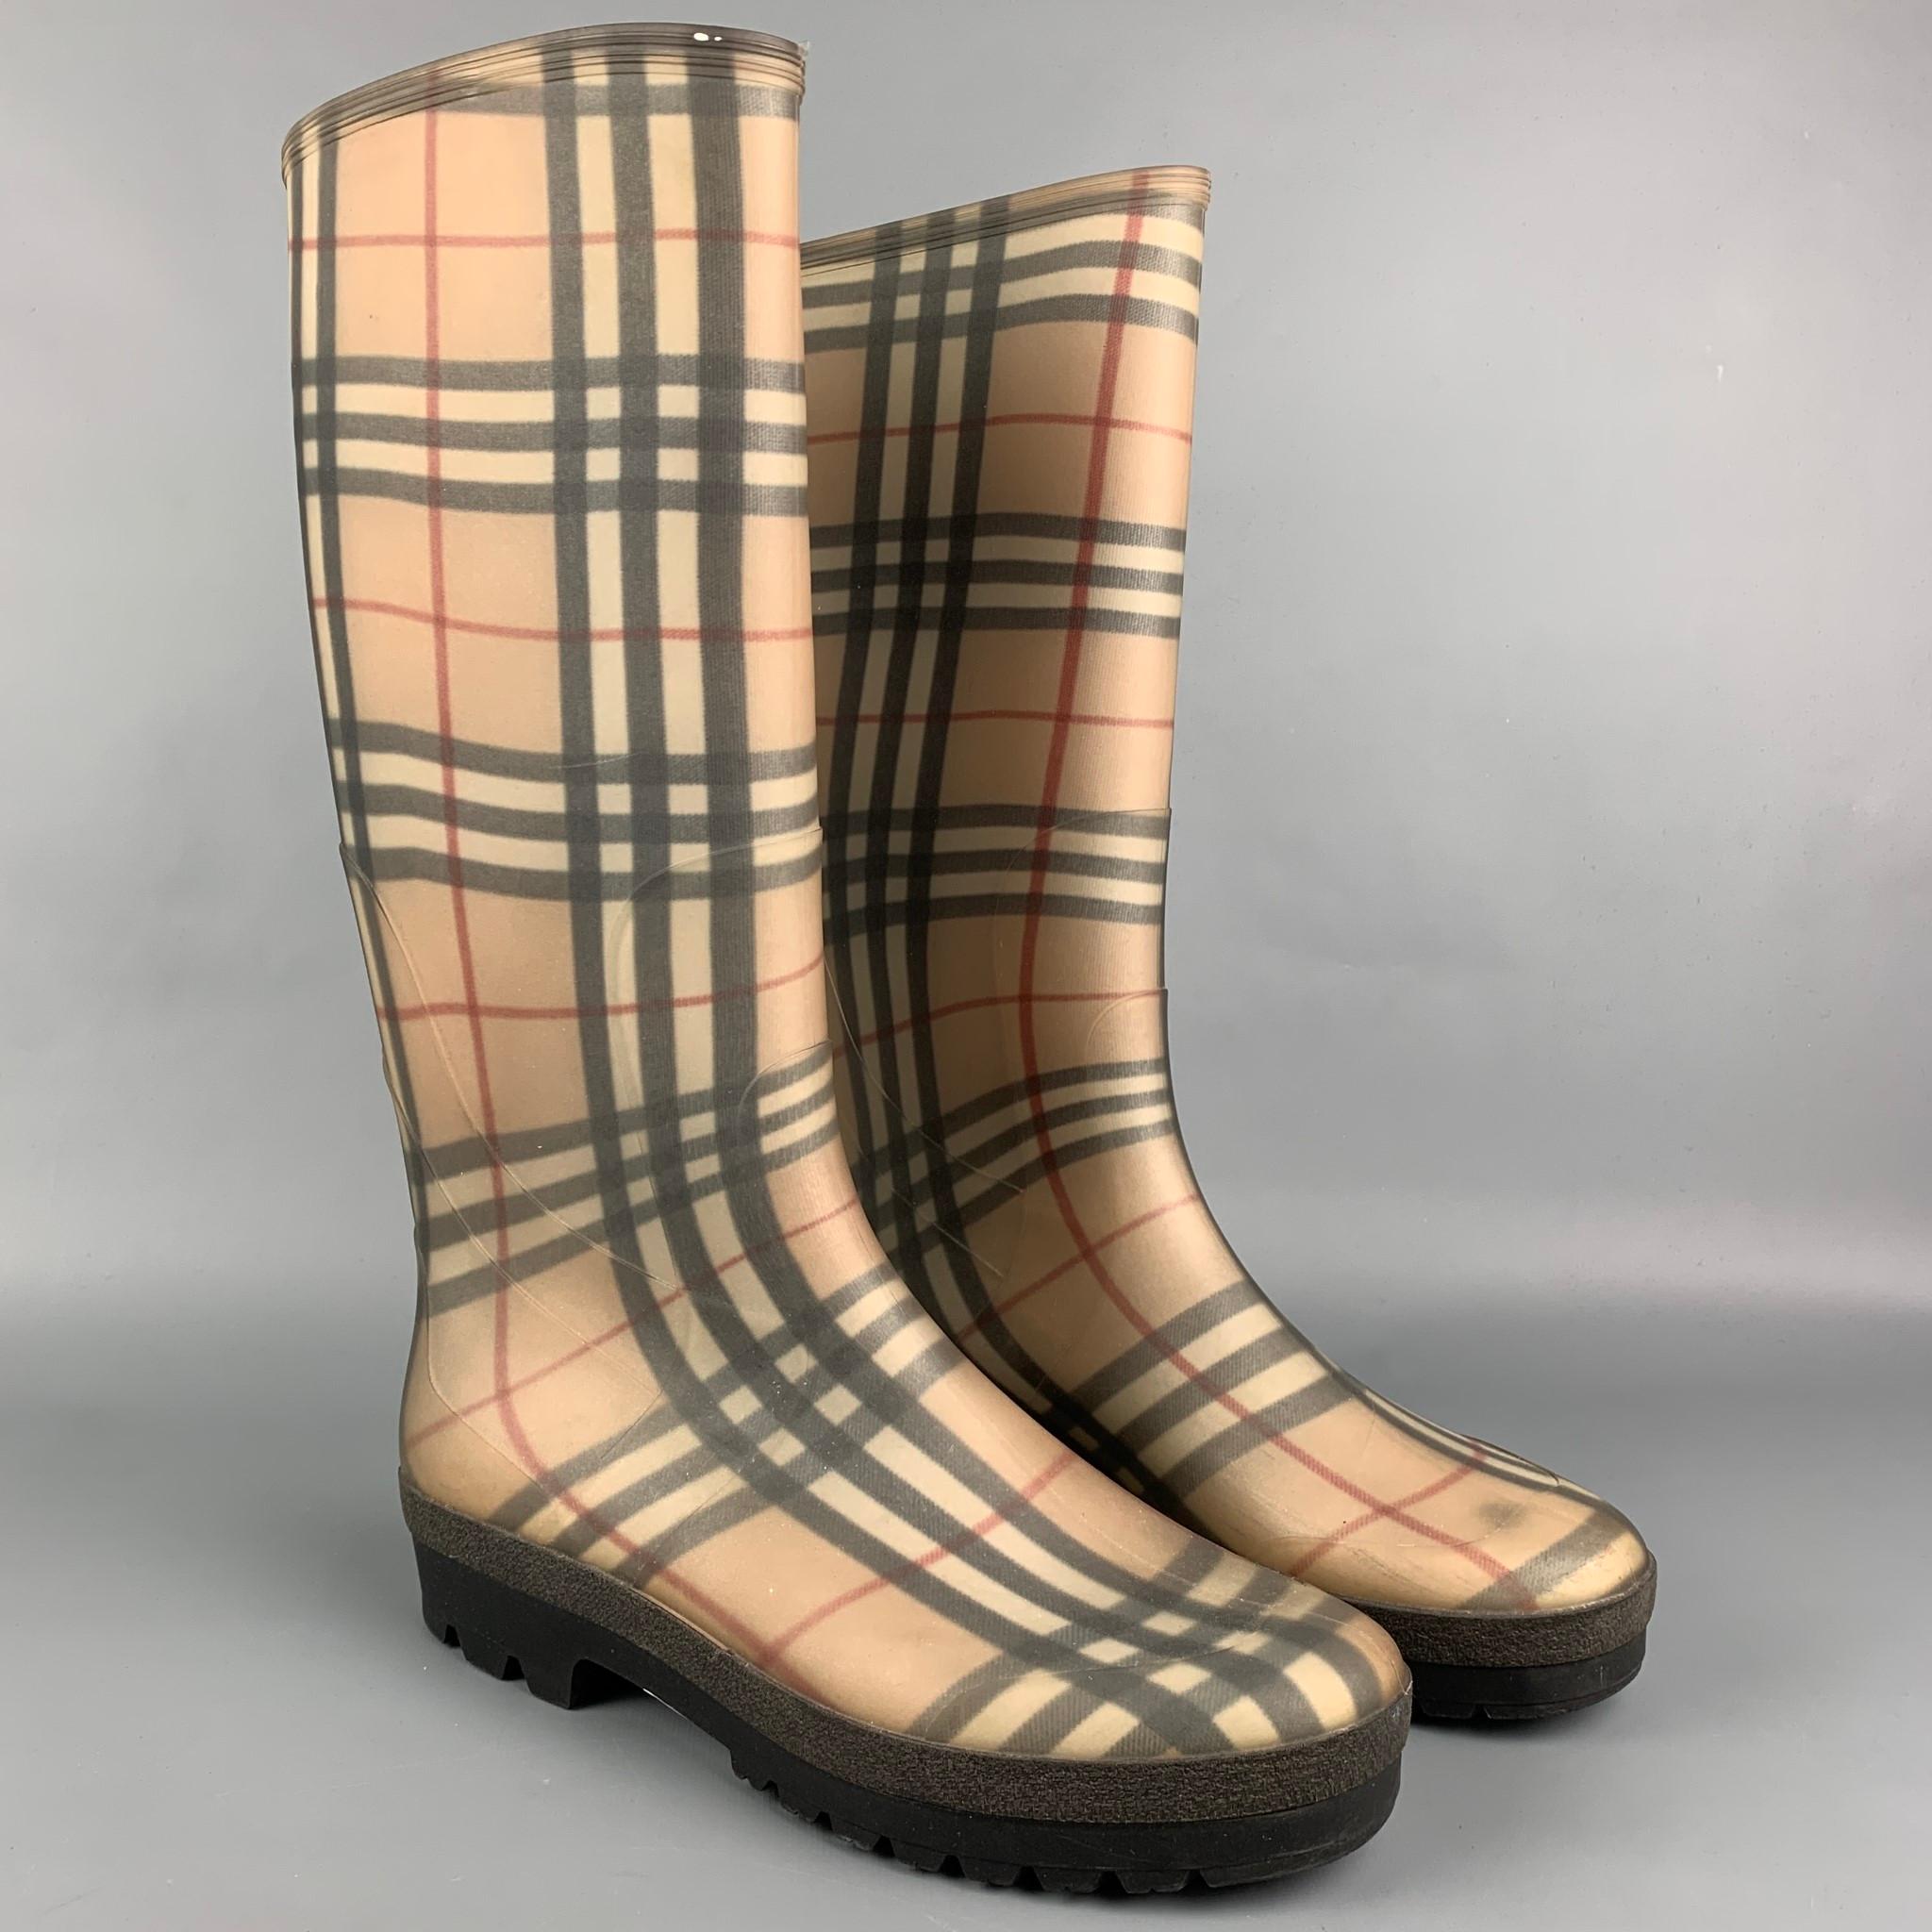 BURBERRY rain boots comes in a beige & black plaid rubber, mid calf, and a chunky heel. 

Good Pre-Owned Condition.
Marked: 43/9
Original Retail Price: $490.00

Measurements:

Length: 11.25 in.
Width: 4 in.
Height: 14.5 in. 